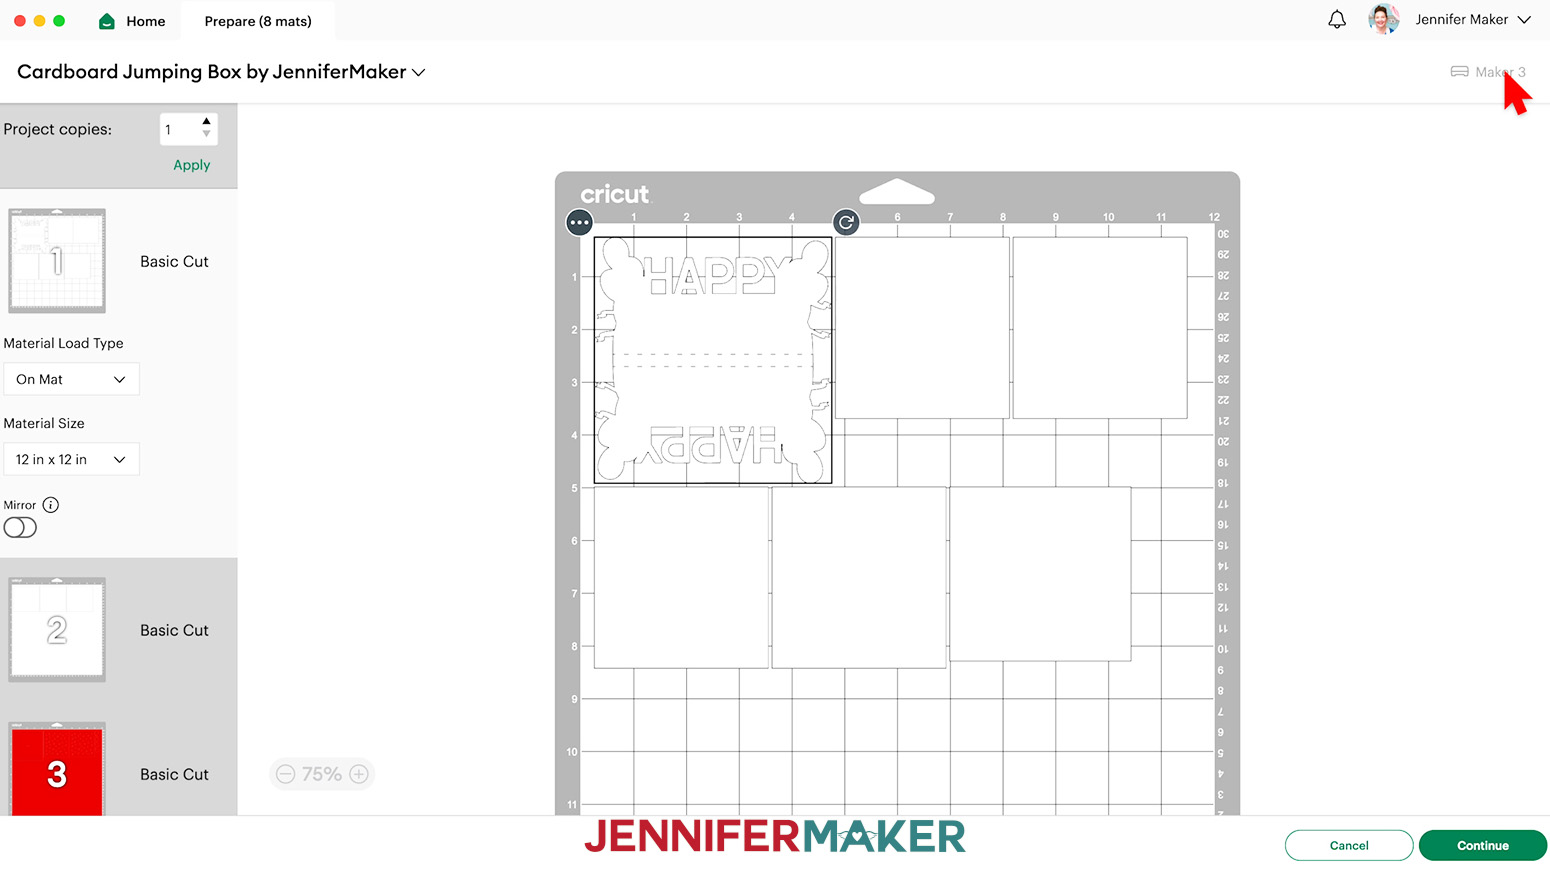 On the Cricut Design Space Prepare screen for the cardboard jumping box, there will be 8 mats